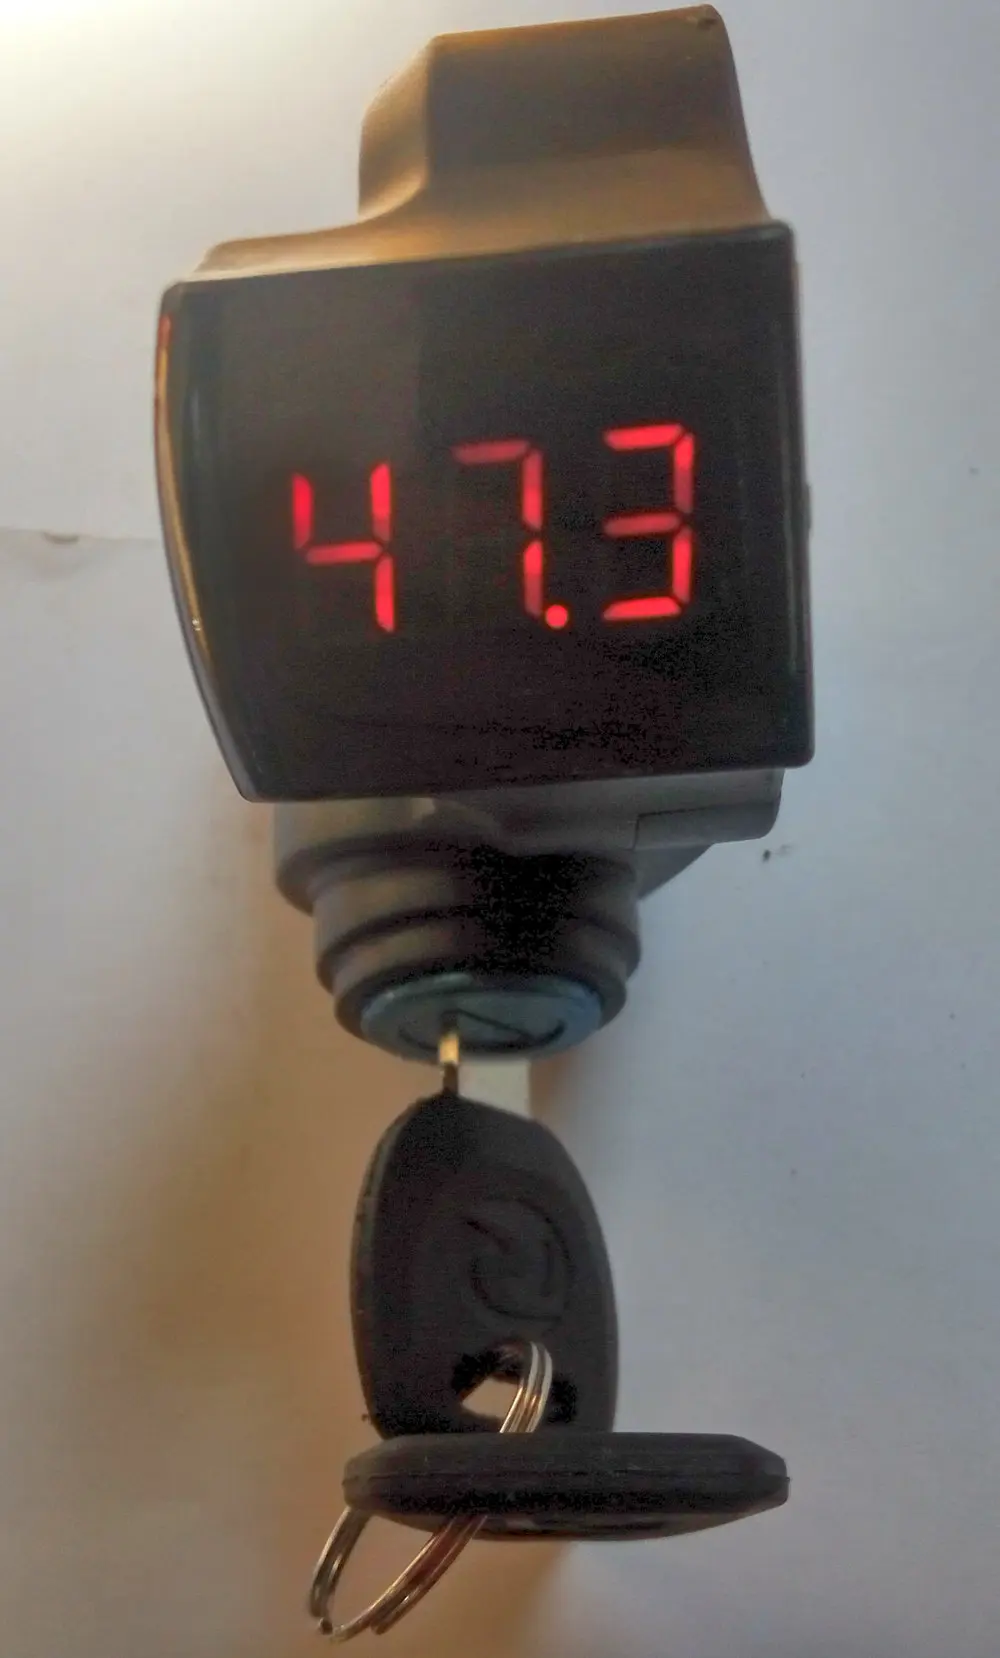 Electric Scooter Battery Voltage with LED Display and Power Key Locker Accelerator